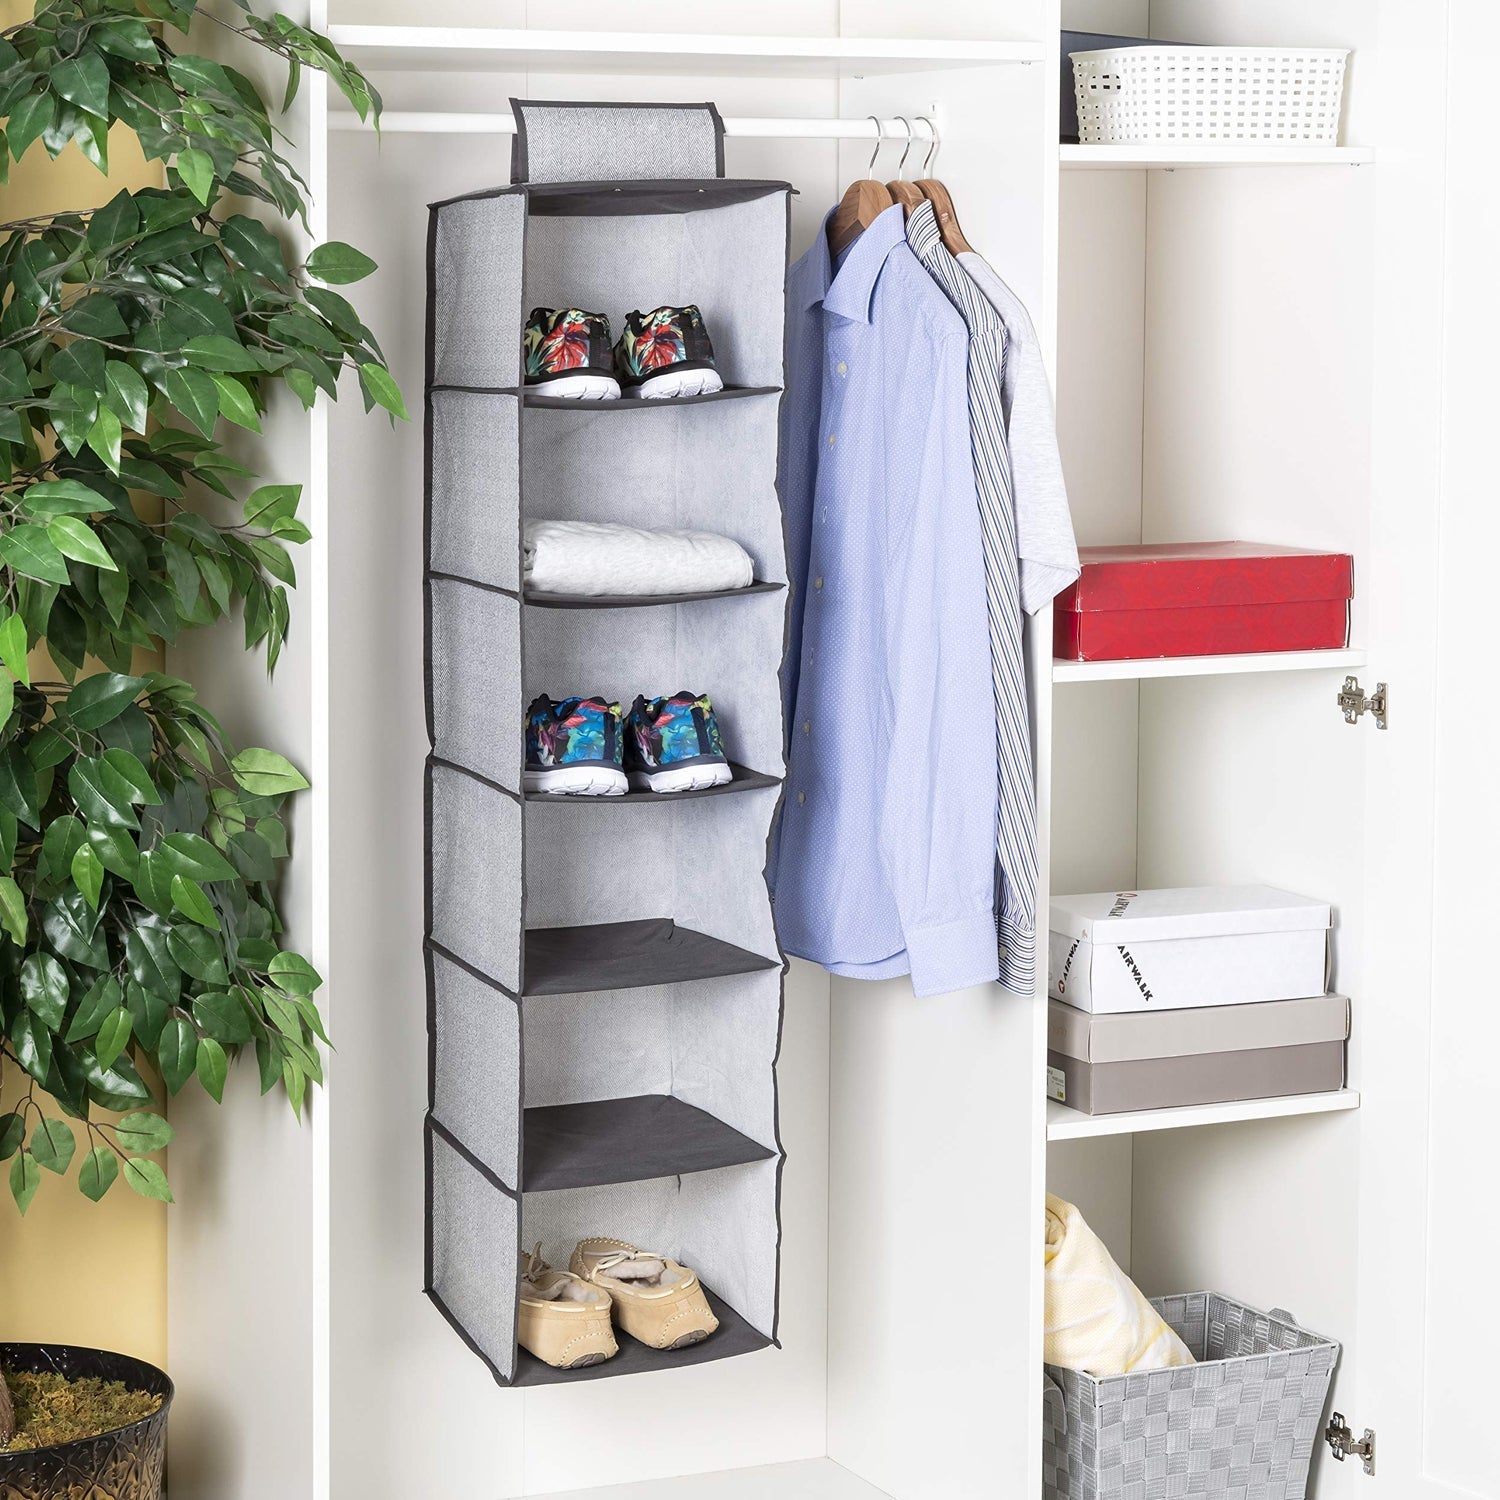 6370  6 Shelf Hanging Closet Organizer, Space Saver, Sweater & Clothing Shelves, Breathable Material Keeps Away Dust & Odors, DeoDap